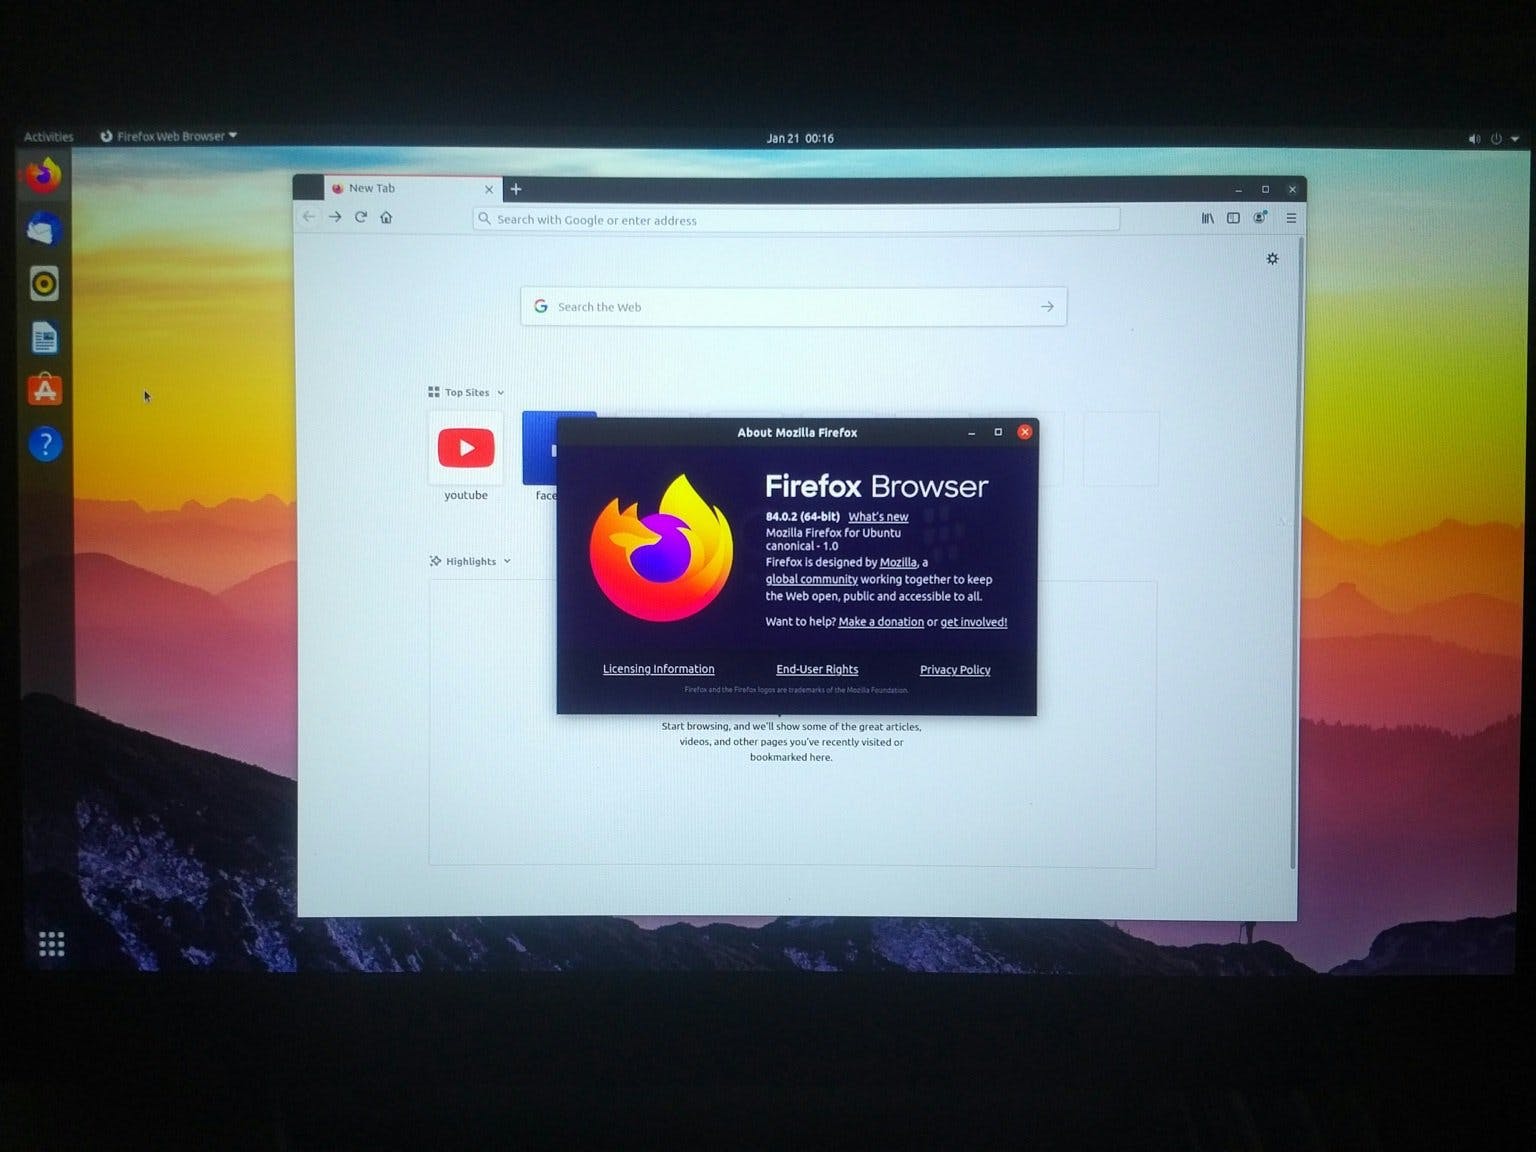 Firefox browser's details window inside Linux operating system